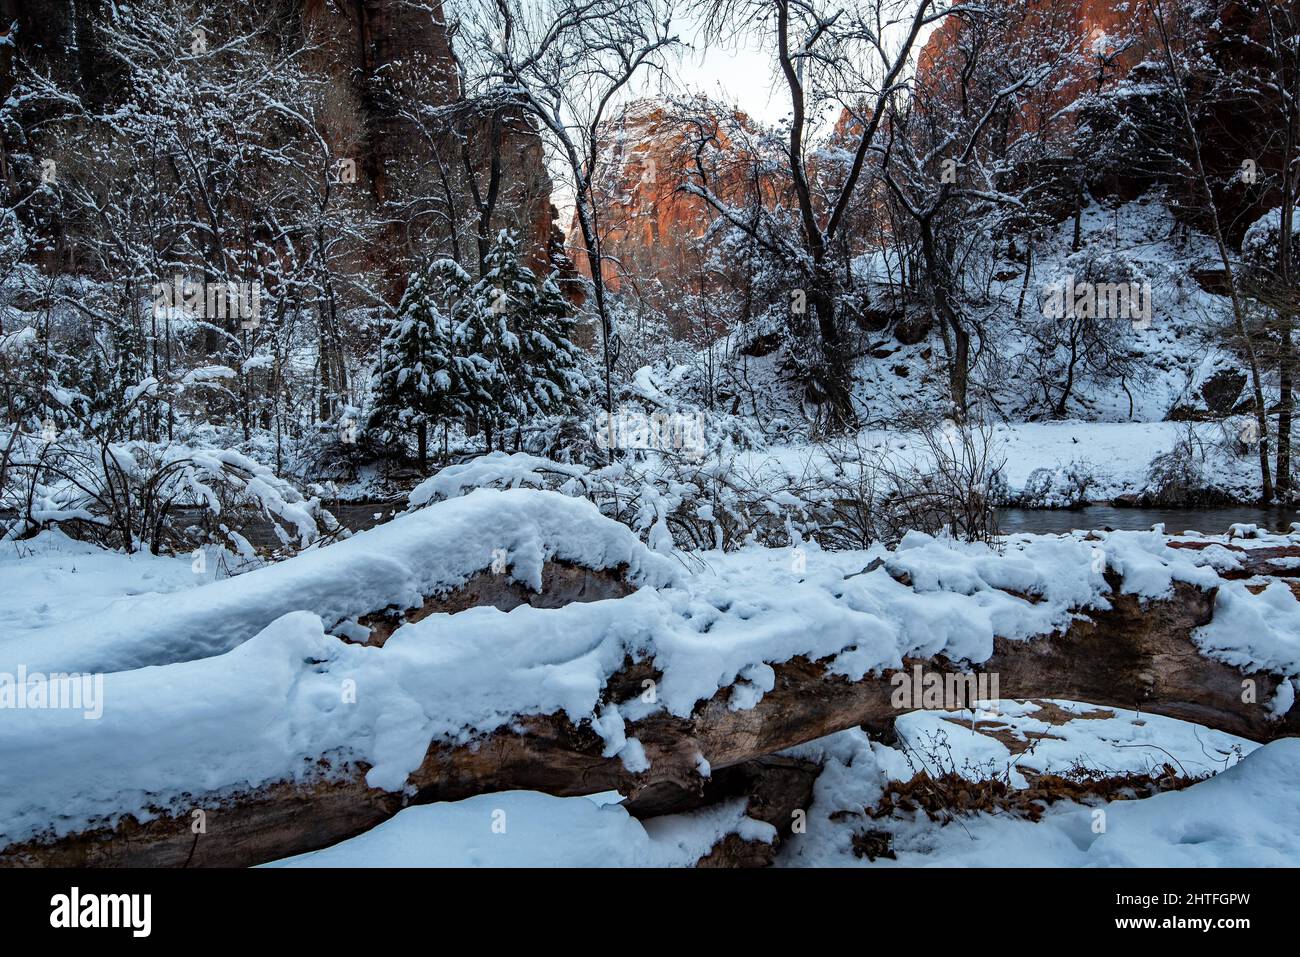 Blanket of snow in Zions National Park, Utah, USA.  Red rock formation in the background.  Newly fallen snow adds great contrast with the red rock. Stock Photo